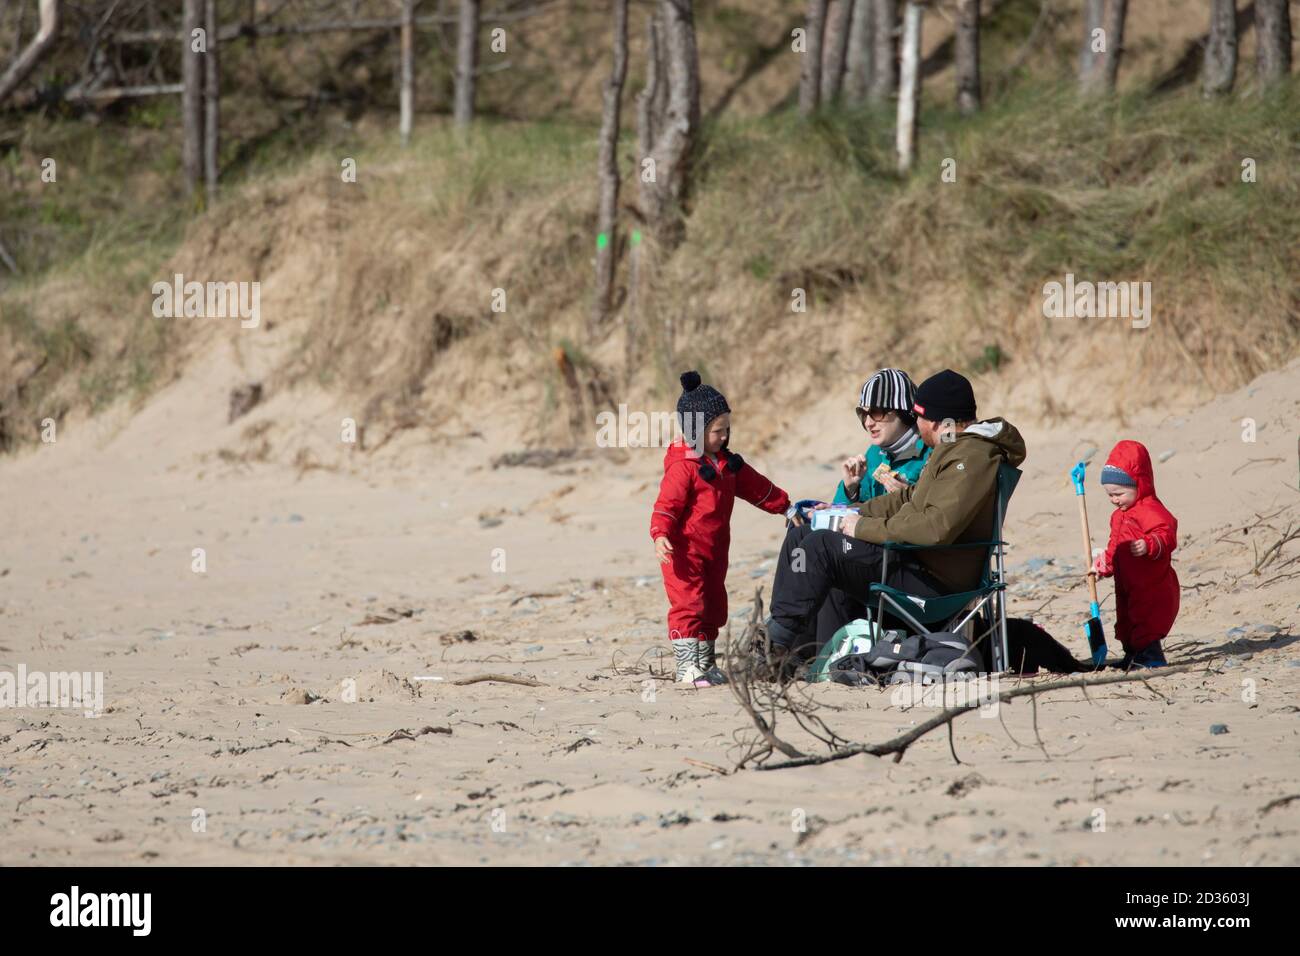 Newborough, Anglesey, North Wales, UK. UK Weather: 7th October 2020 a fine warm day on Anglesey in between weather fronts, with another rain front expected to hit the UK on Friday. A family taking advantage of a day without rain on Newborough Beach, Anglesey © DGDImages/AlamyNews Stock Photo